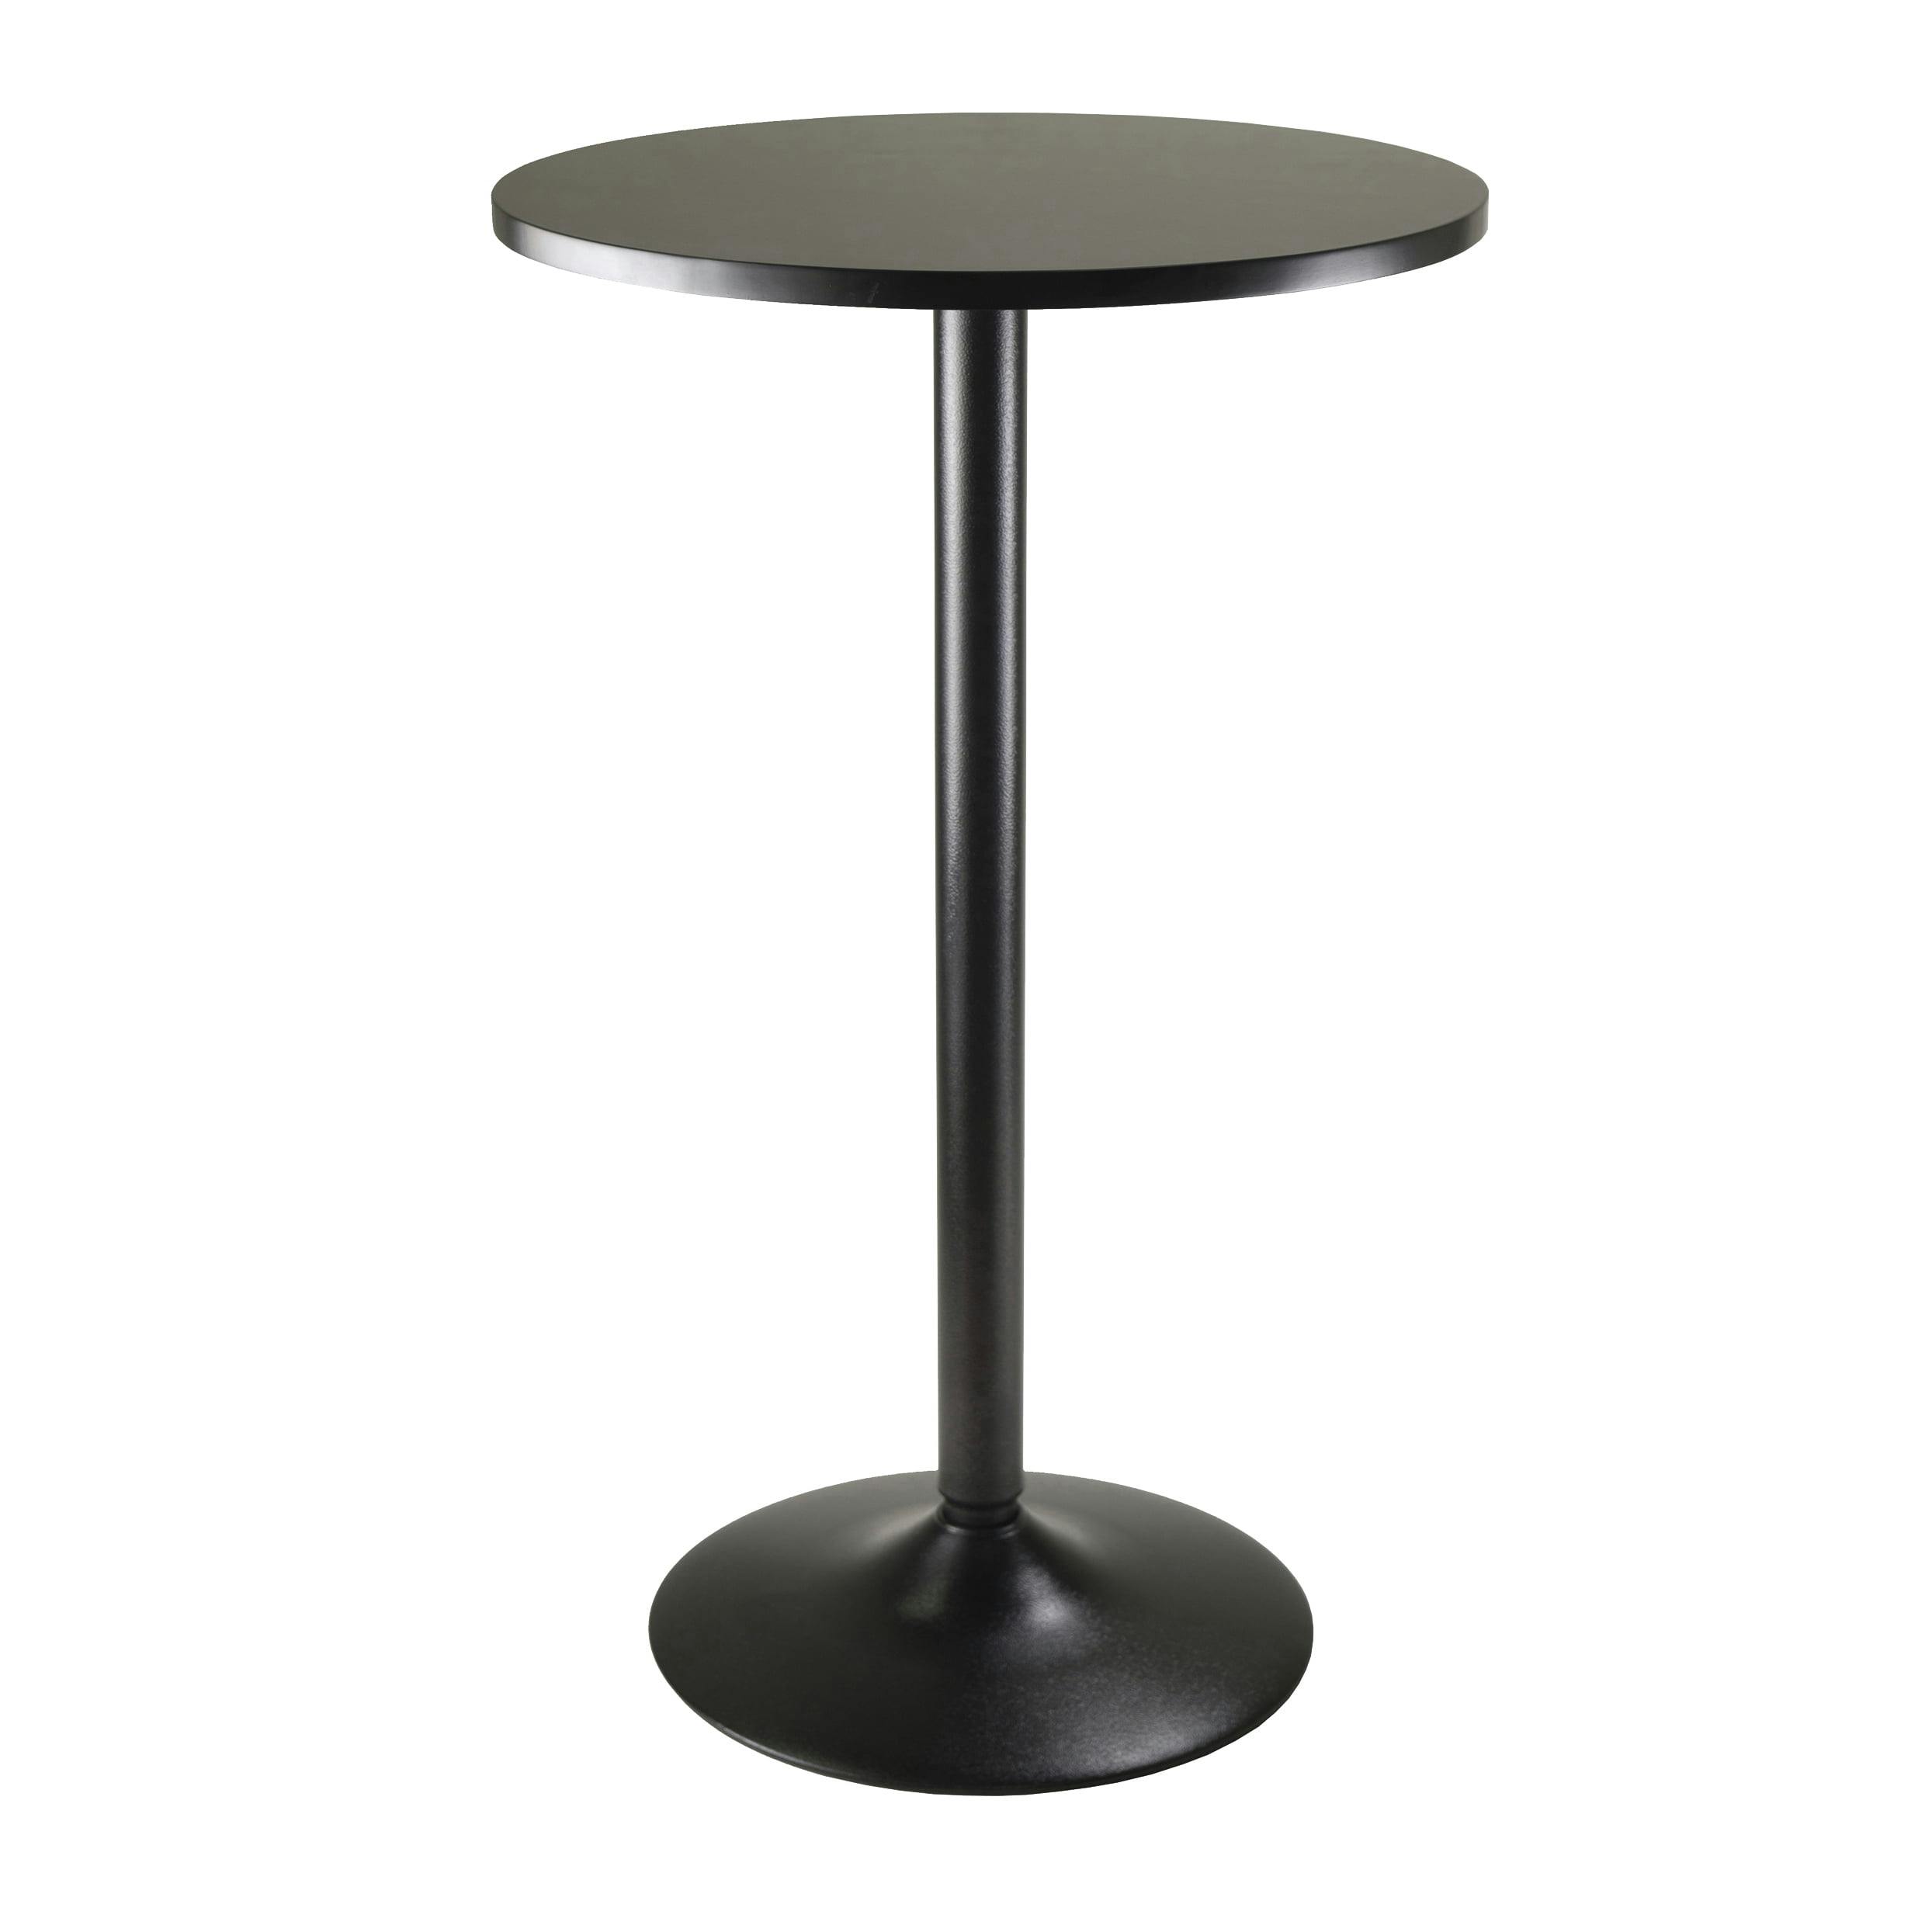 Transitional Black Round Wood Counter Height Pub Table - 23.62"